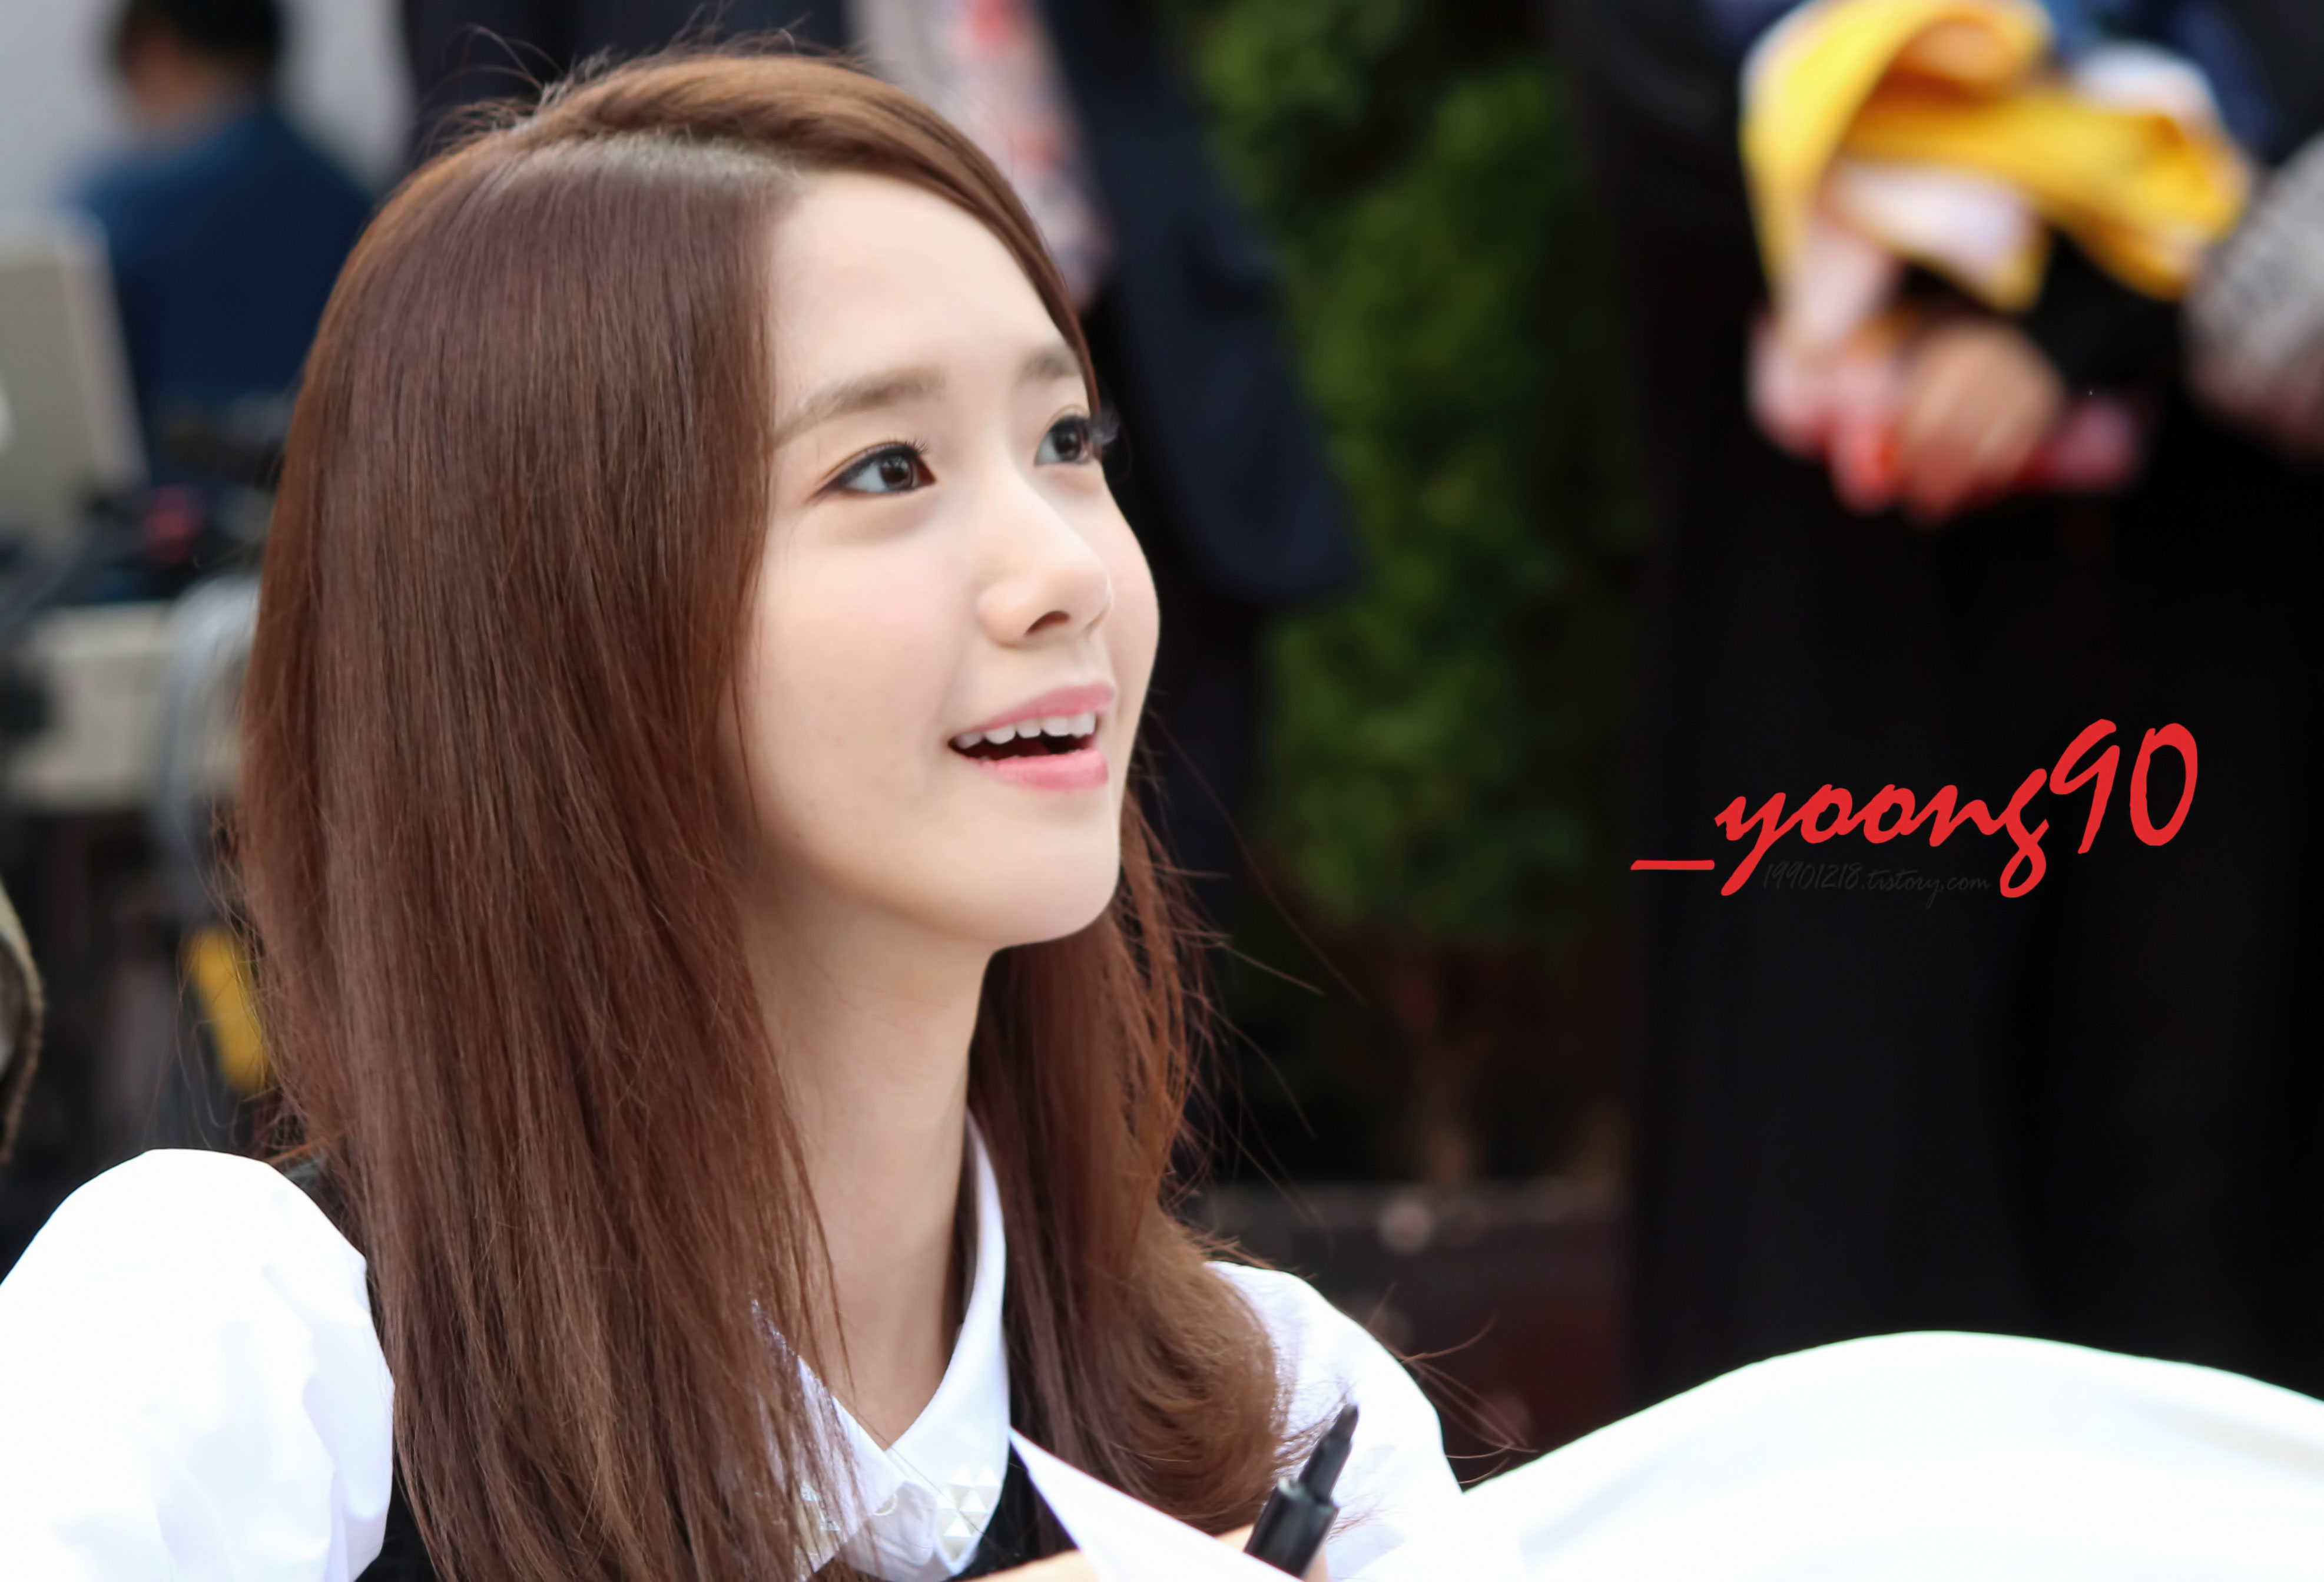 Yoona @ Lotte Department Store fansign HD